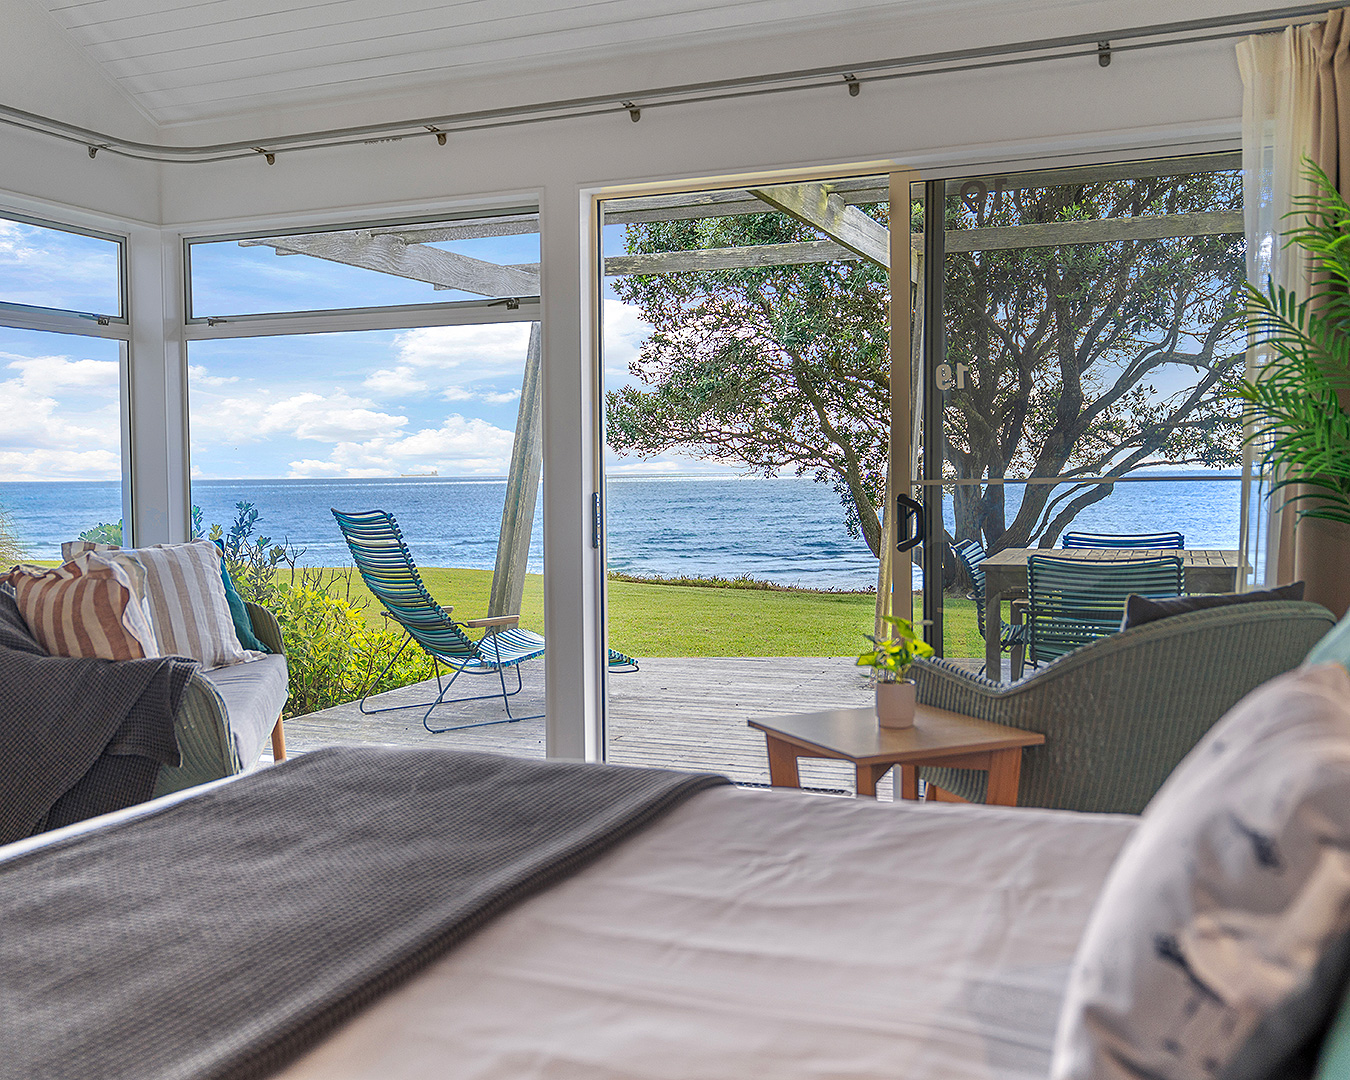 A stunning view from one of the new villas at Tasman Holiday Parks Papamoa Beach.